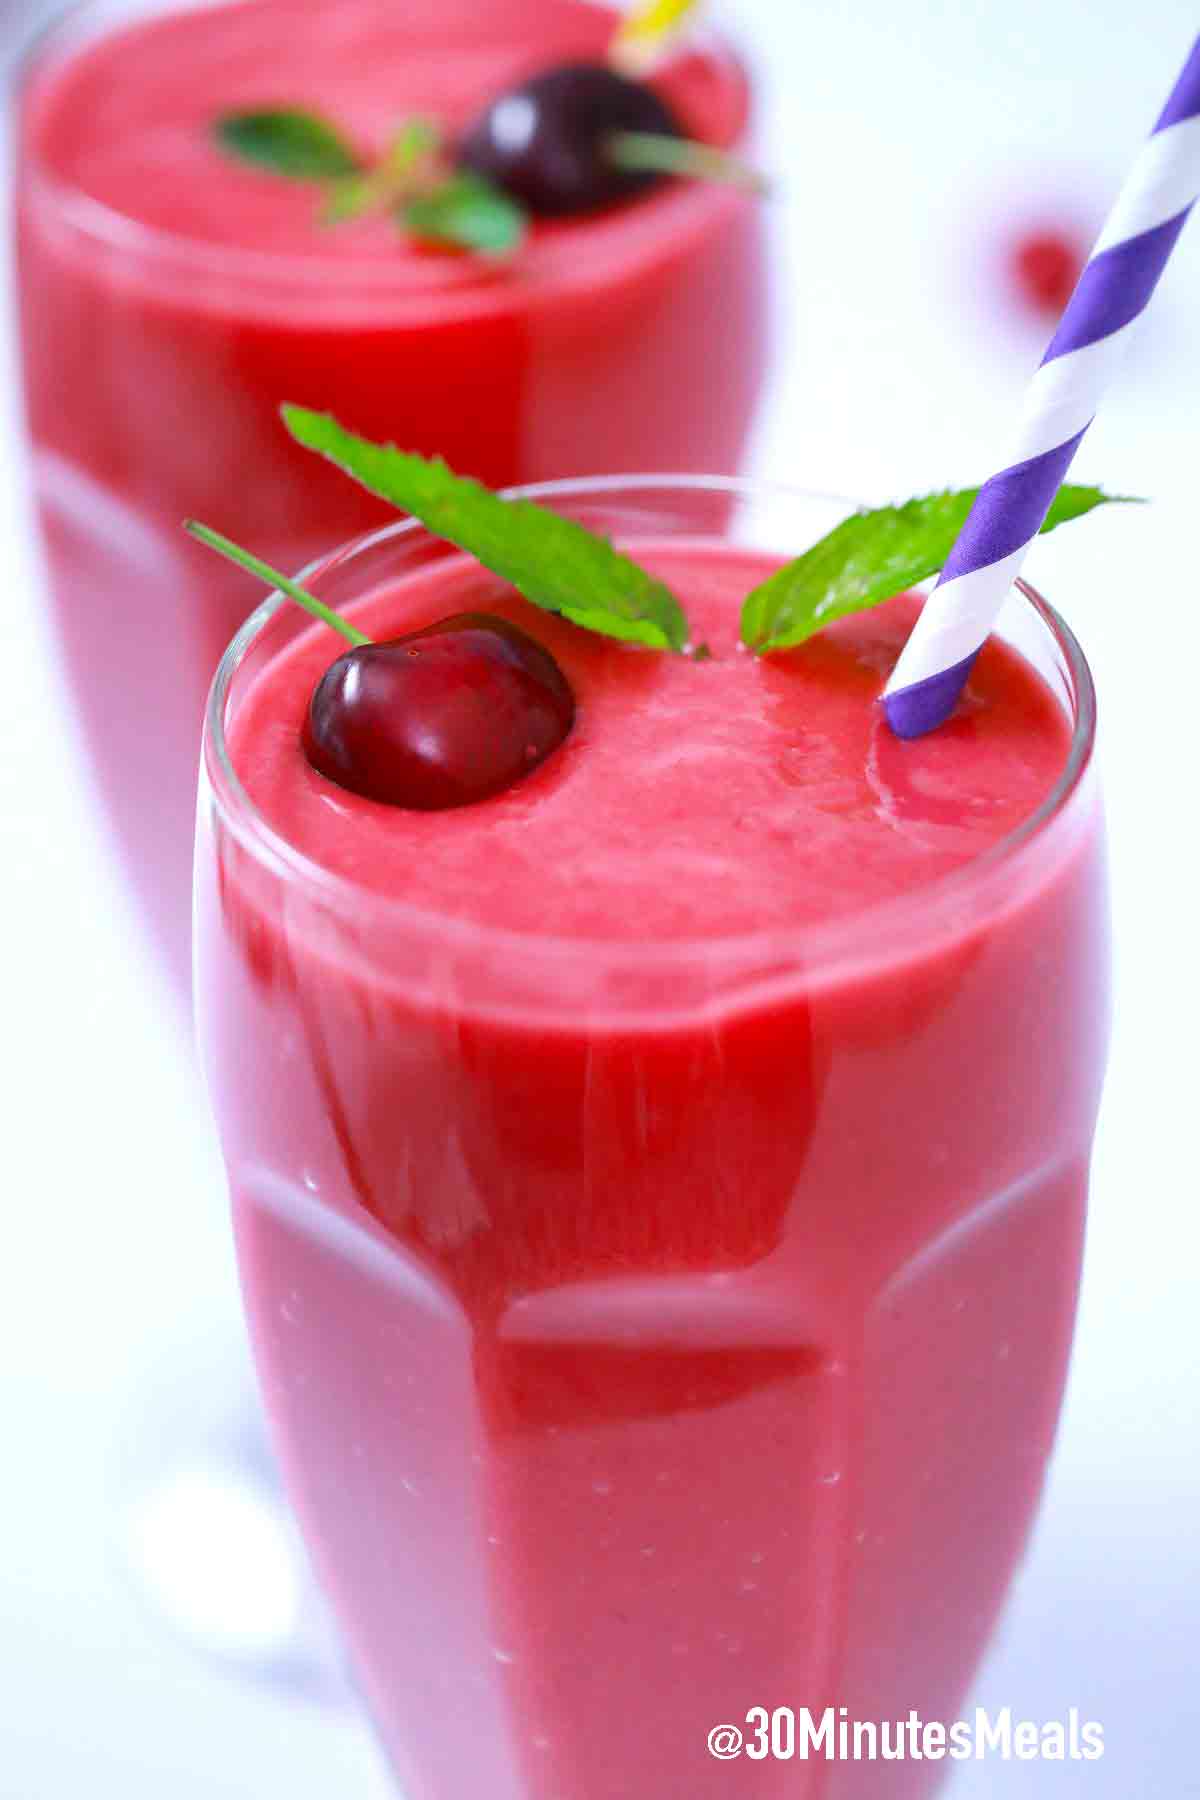 Cherry Smoothie Recipe - 30 minutes meals